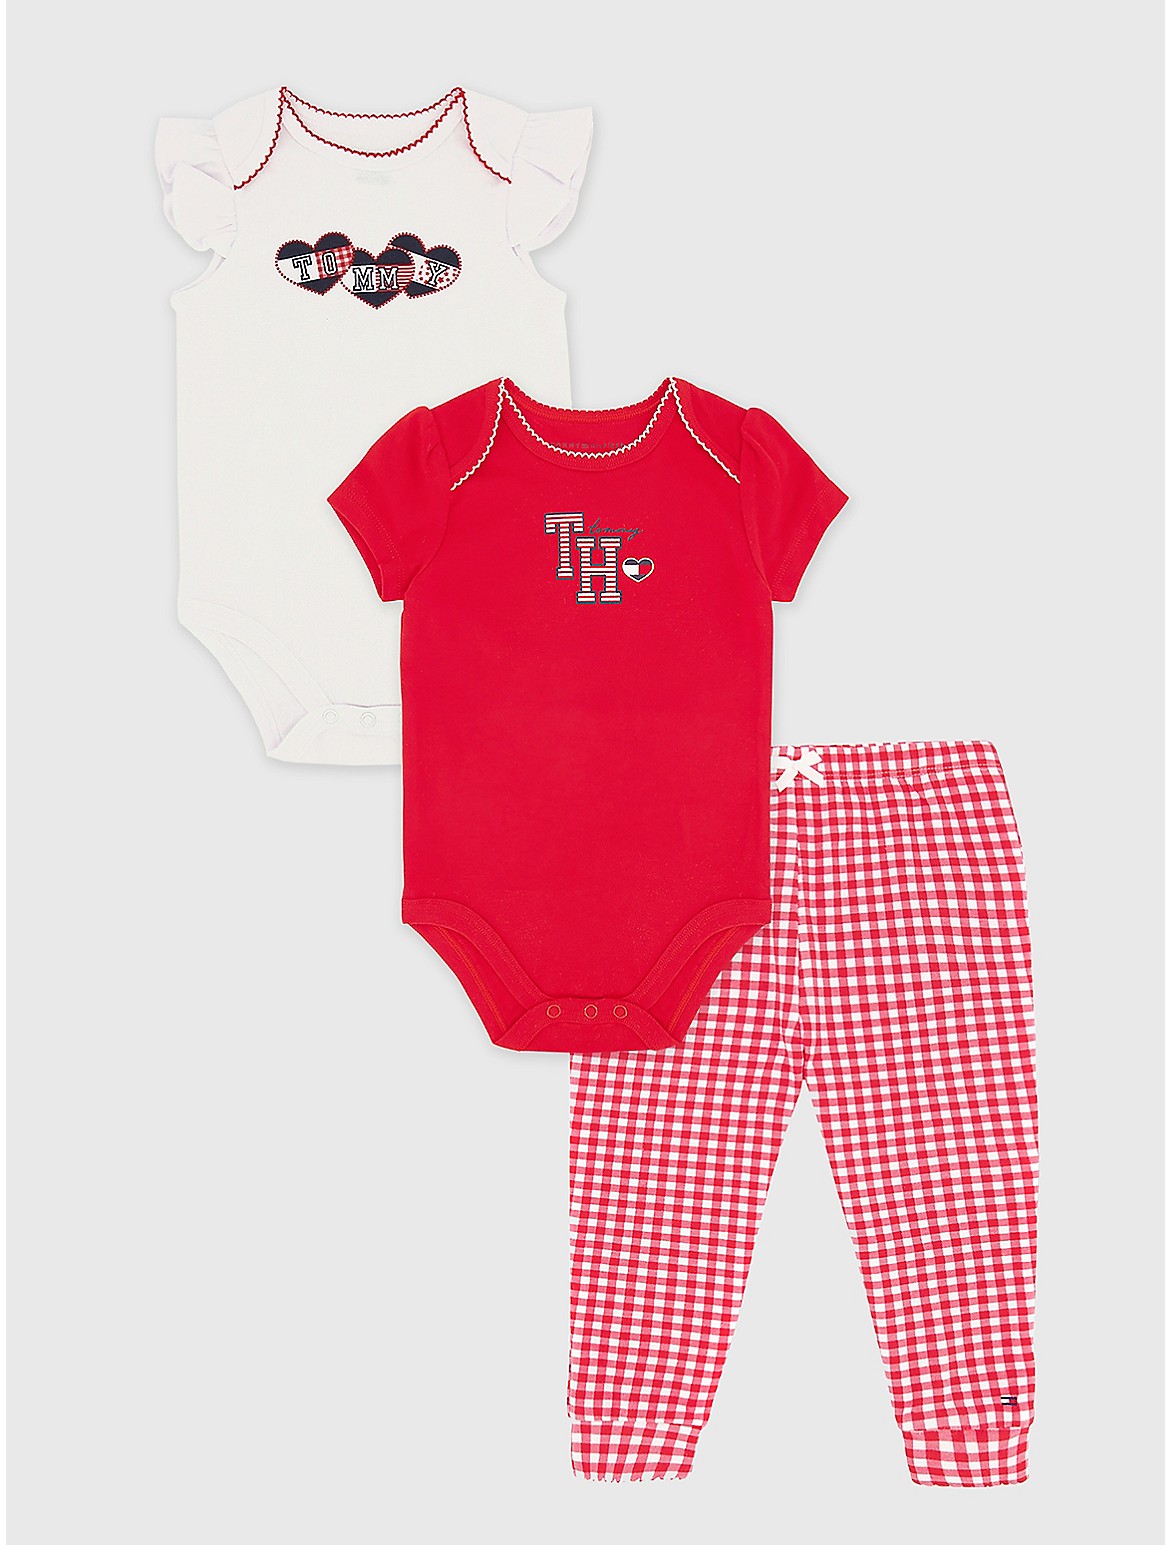 Tommy Hilfiger Girls' Babies' Onesie and Pant Set 3PC - Multi - 0-3M